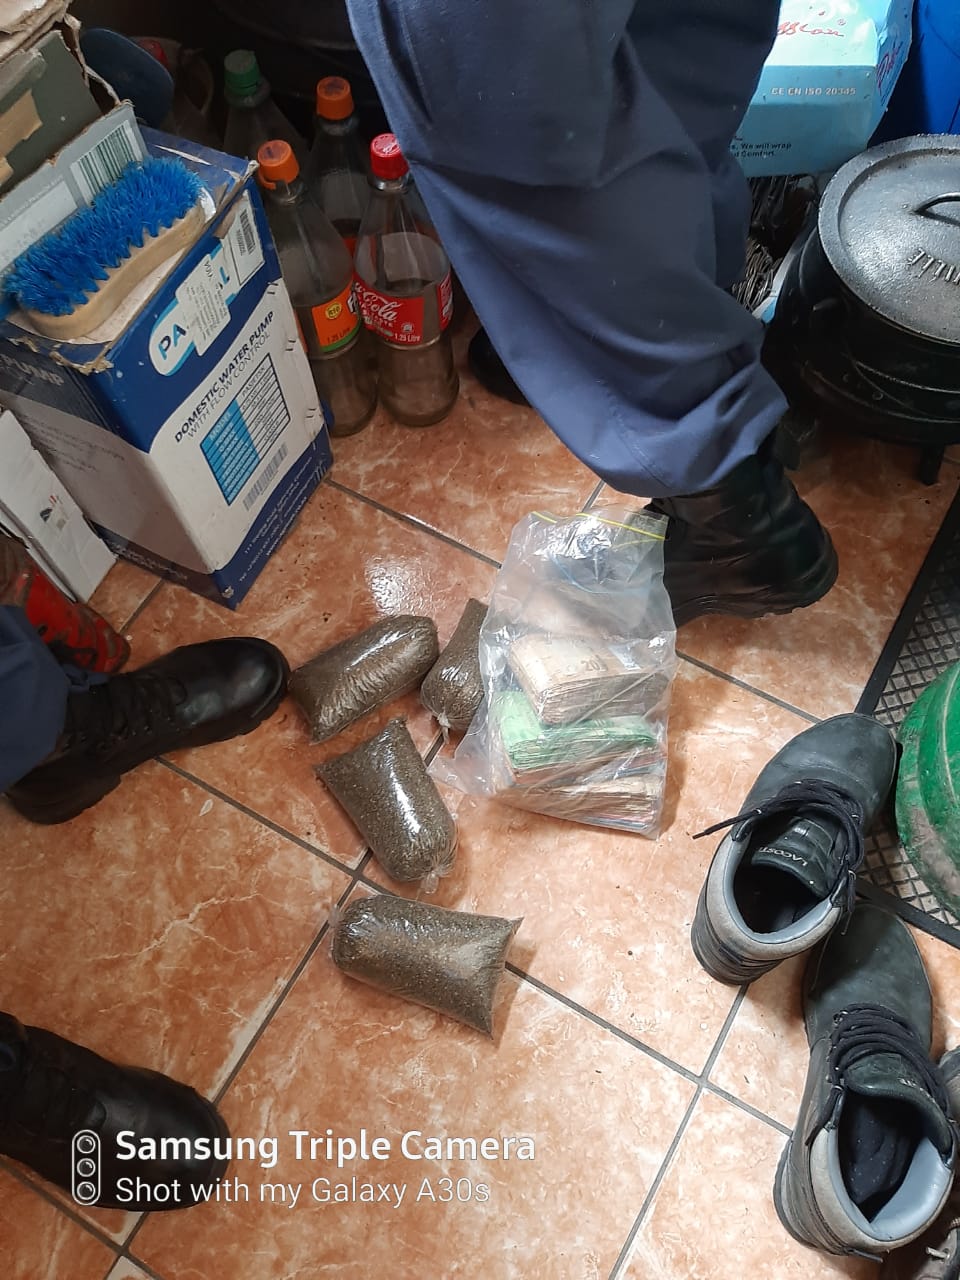 Suspect arrested for dealing in drugs in Mpumalanga